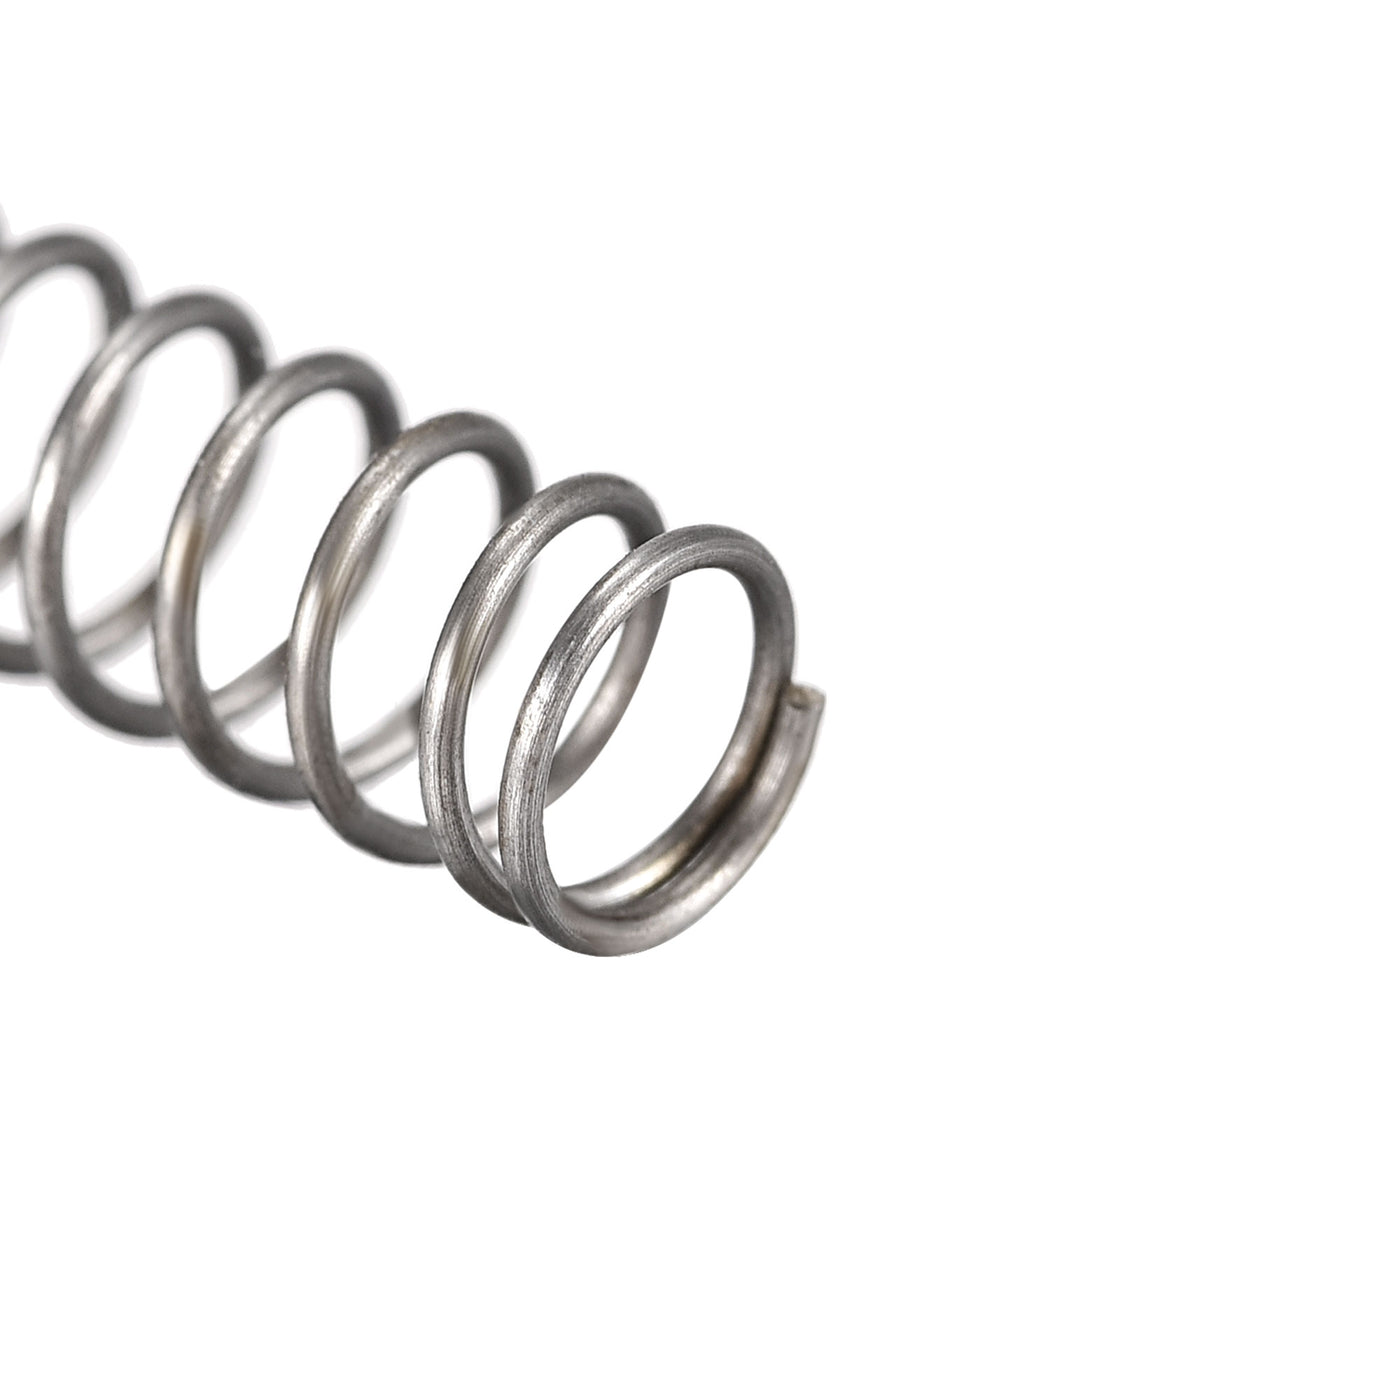 uxcell Uxcell Compressed Spring,5mmx0.5mmx25mm Free Length,10.6N Load Capacity,Gray,30pcs